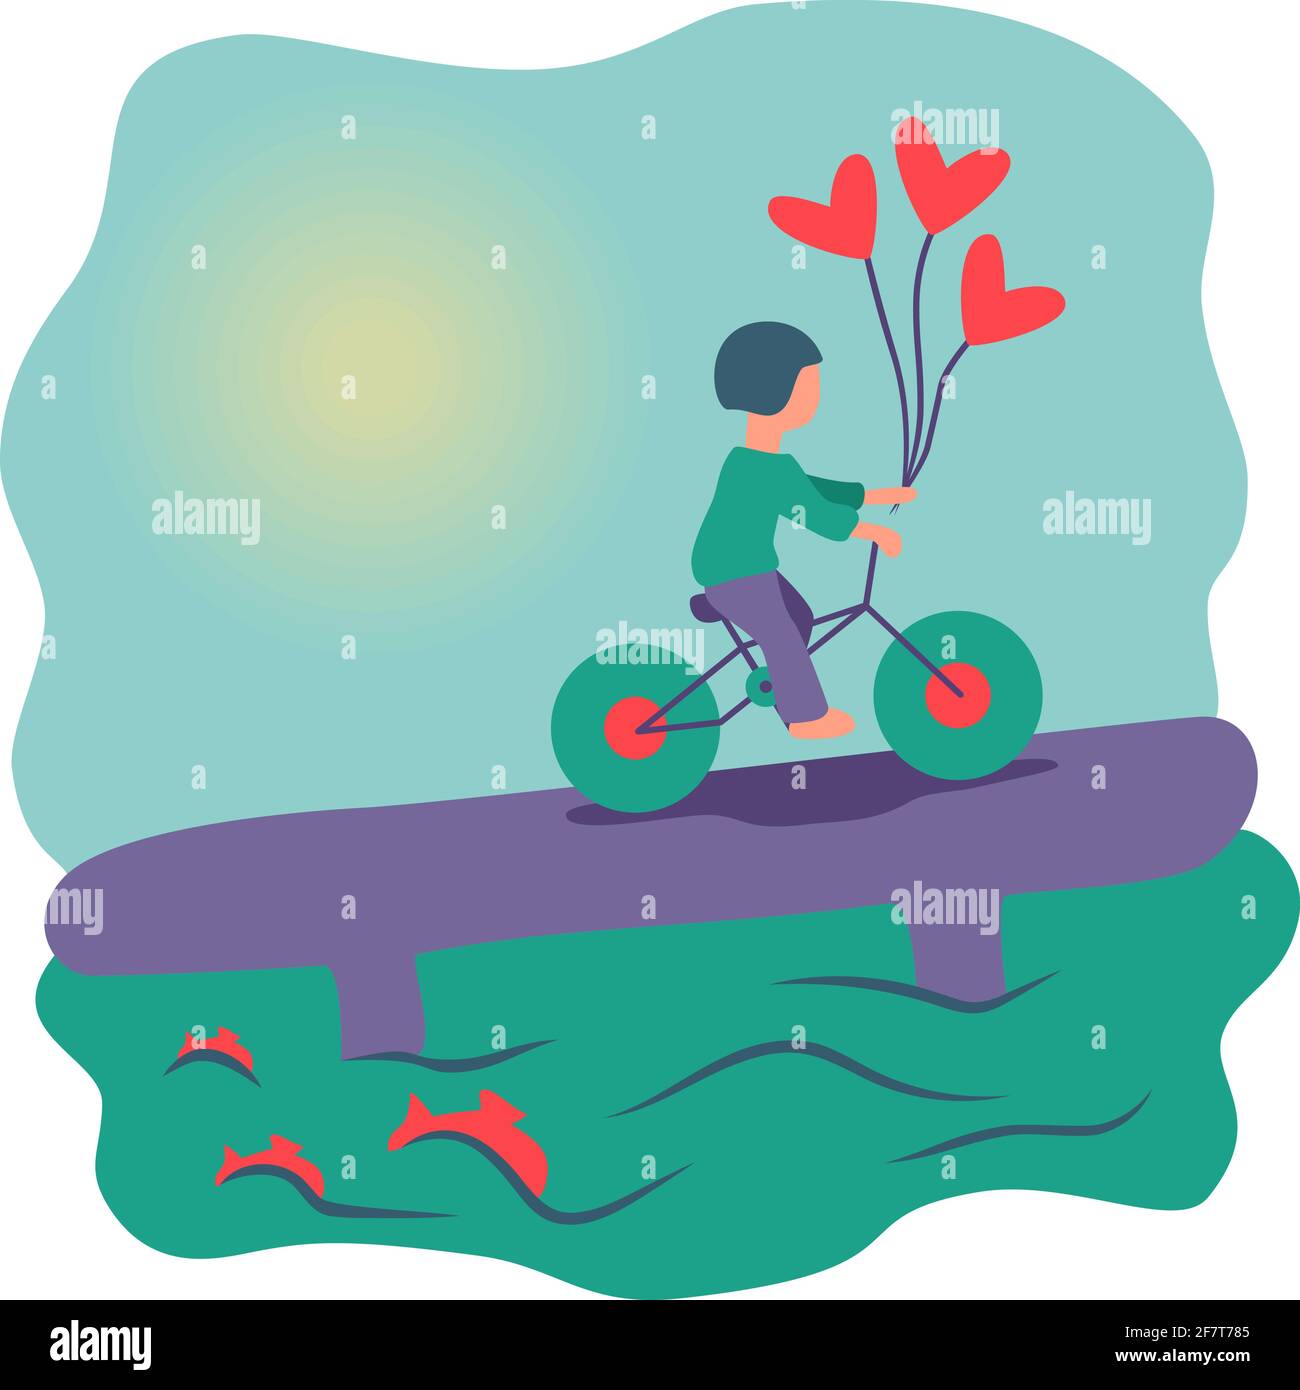 vector illustration, guy rides a bicycle across the bridge, holding heart-shaped balloons in his hand, the sun is shining, fish are visible in the wat Stock Vector